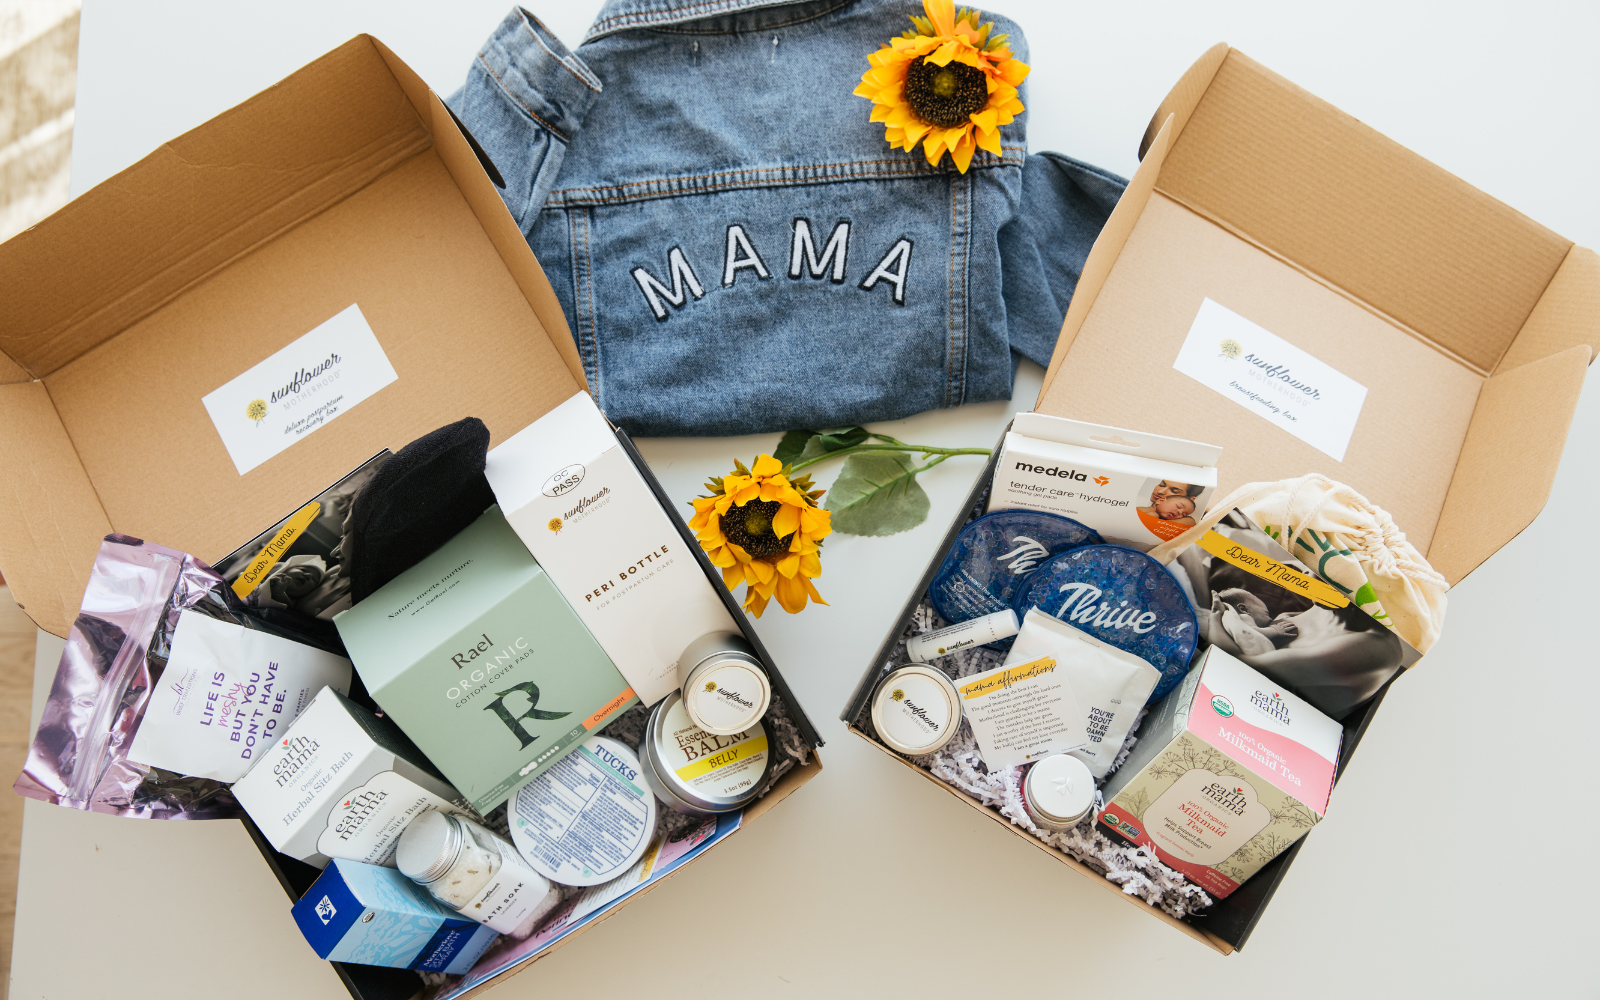 A box containing a sunflower and a denim jacket, representing a combination of nature and fashion.